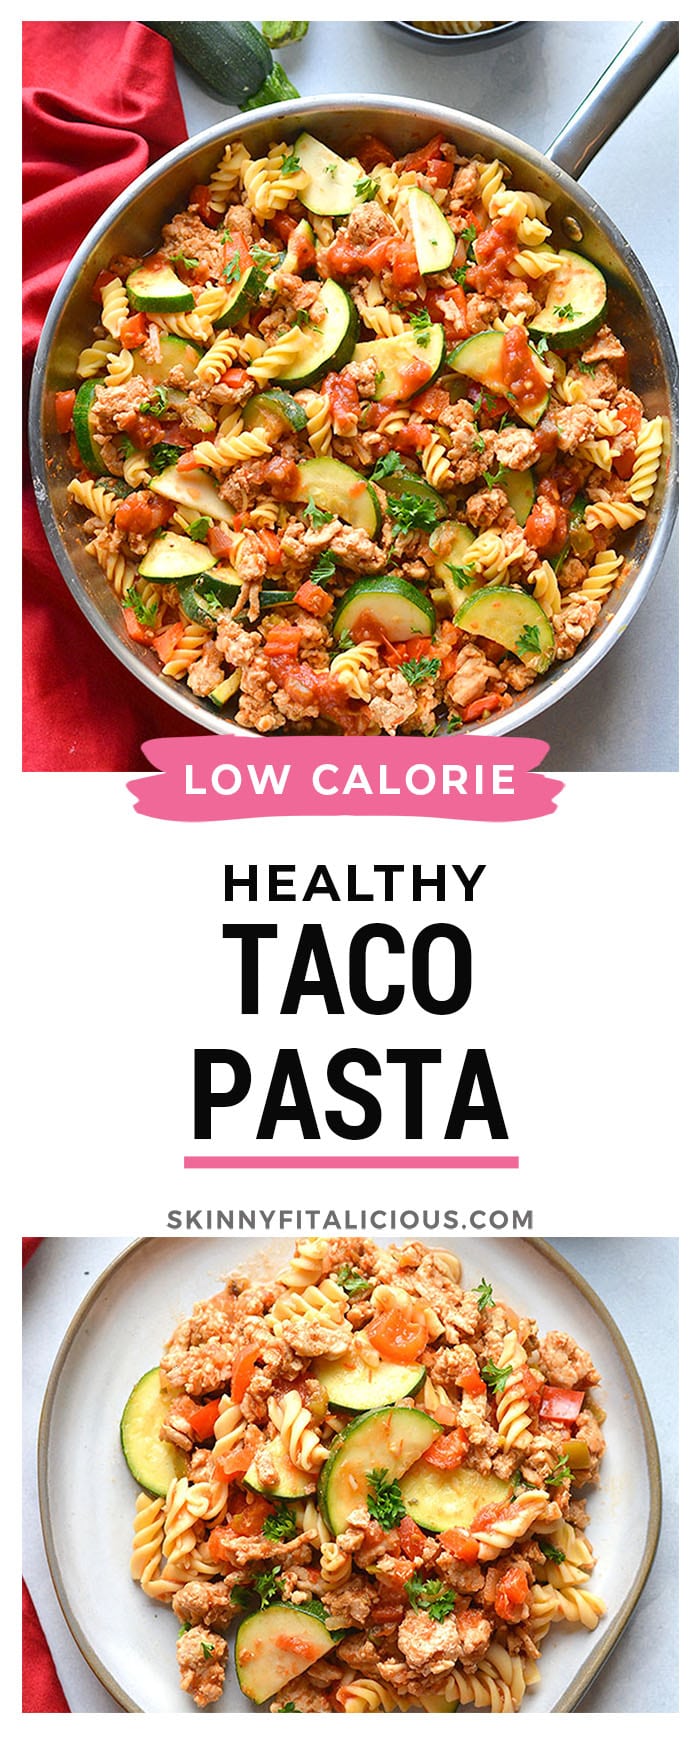 Healthy Taco Pasta is a low calorie dinner made with chickpea pasta, chicken, vegetables and salsa. High in protein and fiber, this family approved meal is healthy and easy to make!